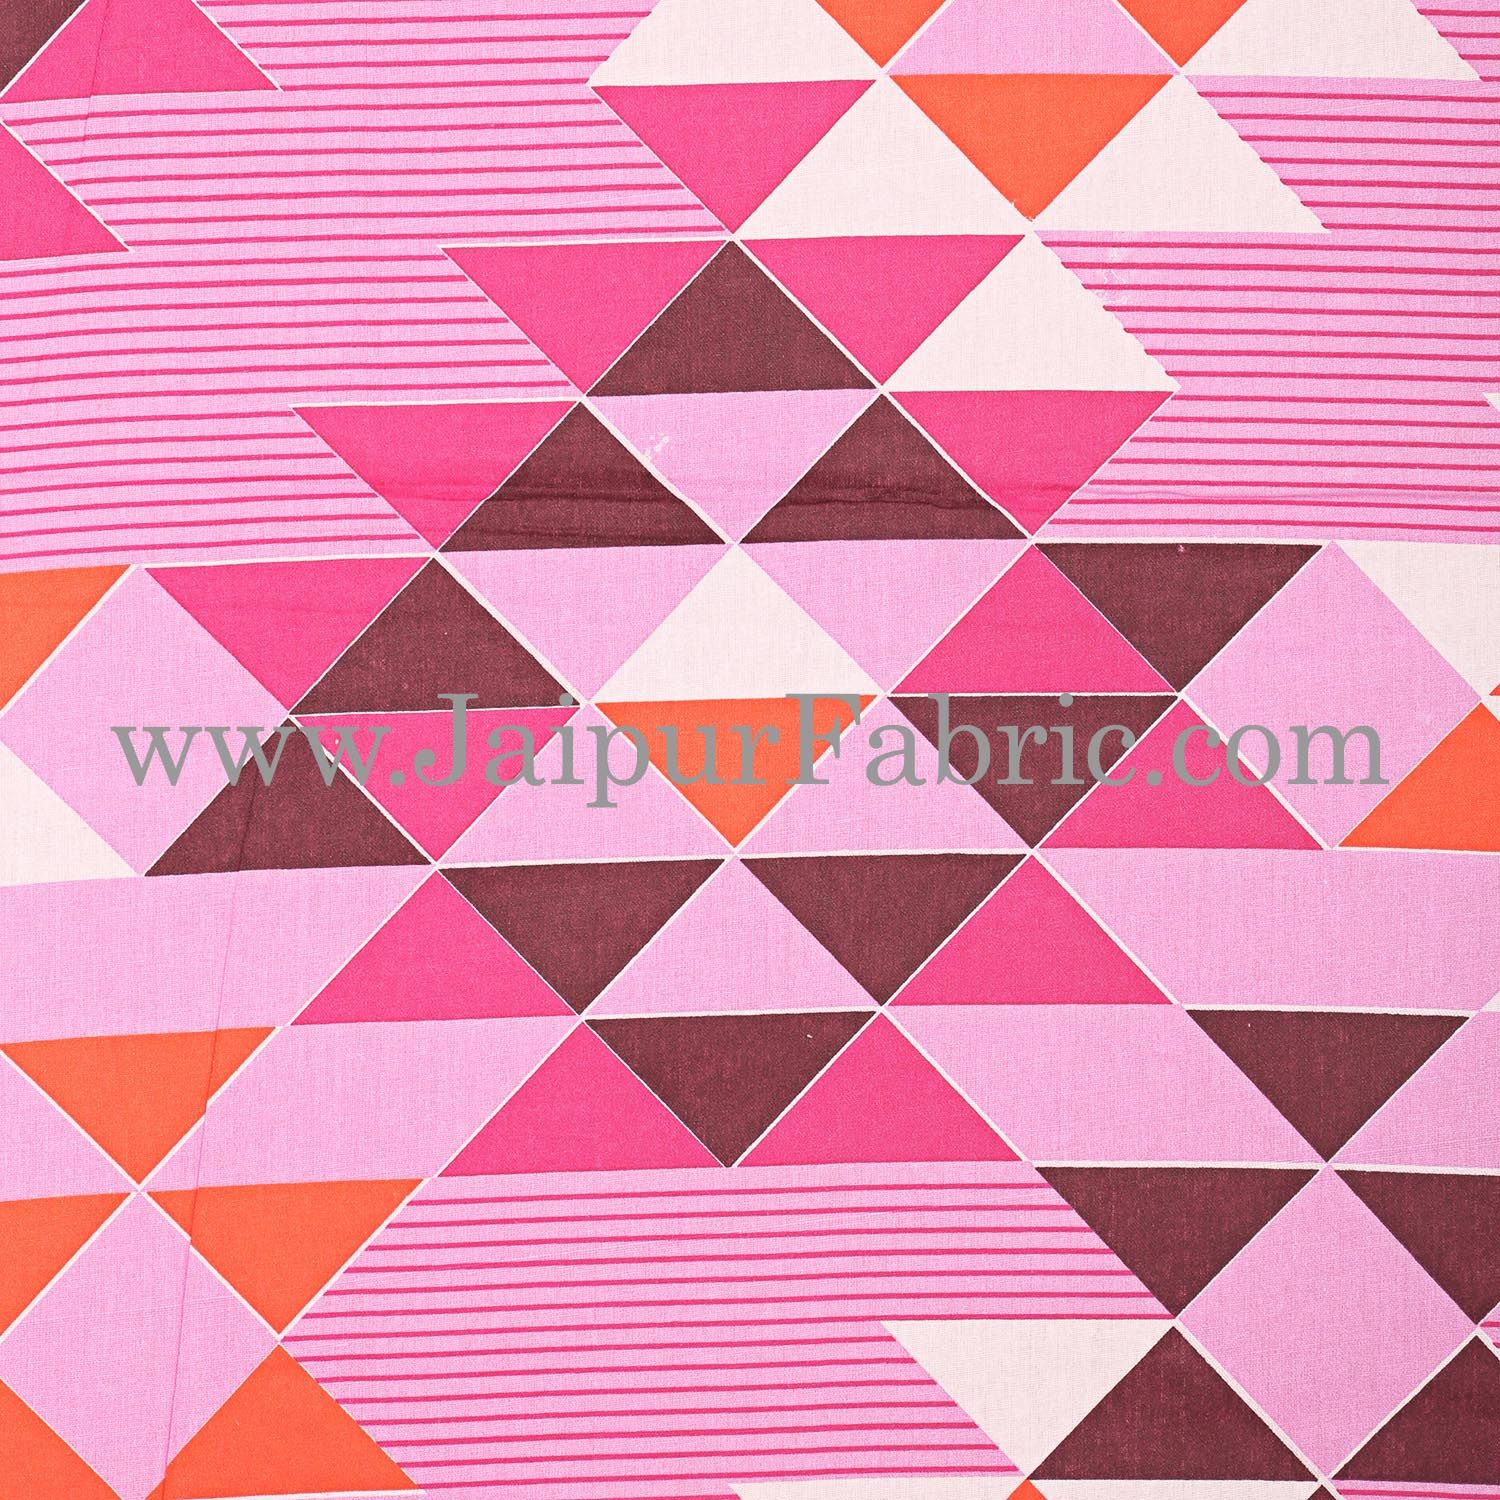 Pink Geometry Design Cotton Double Bed Sheet